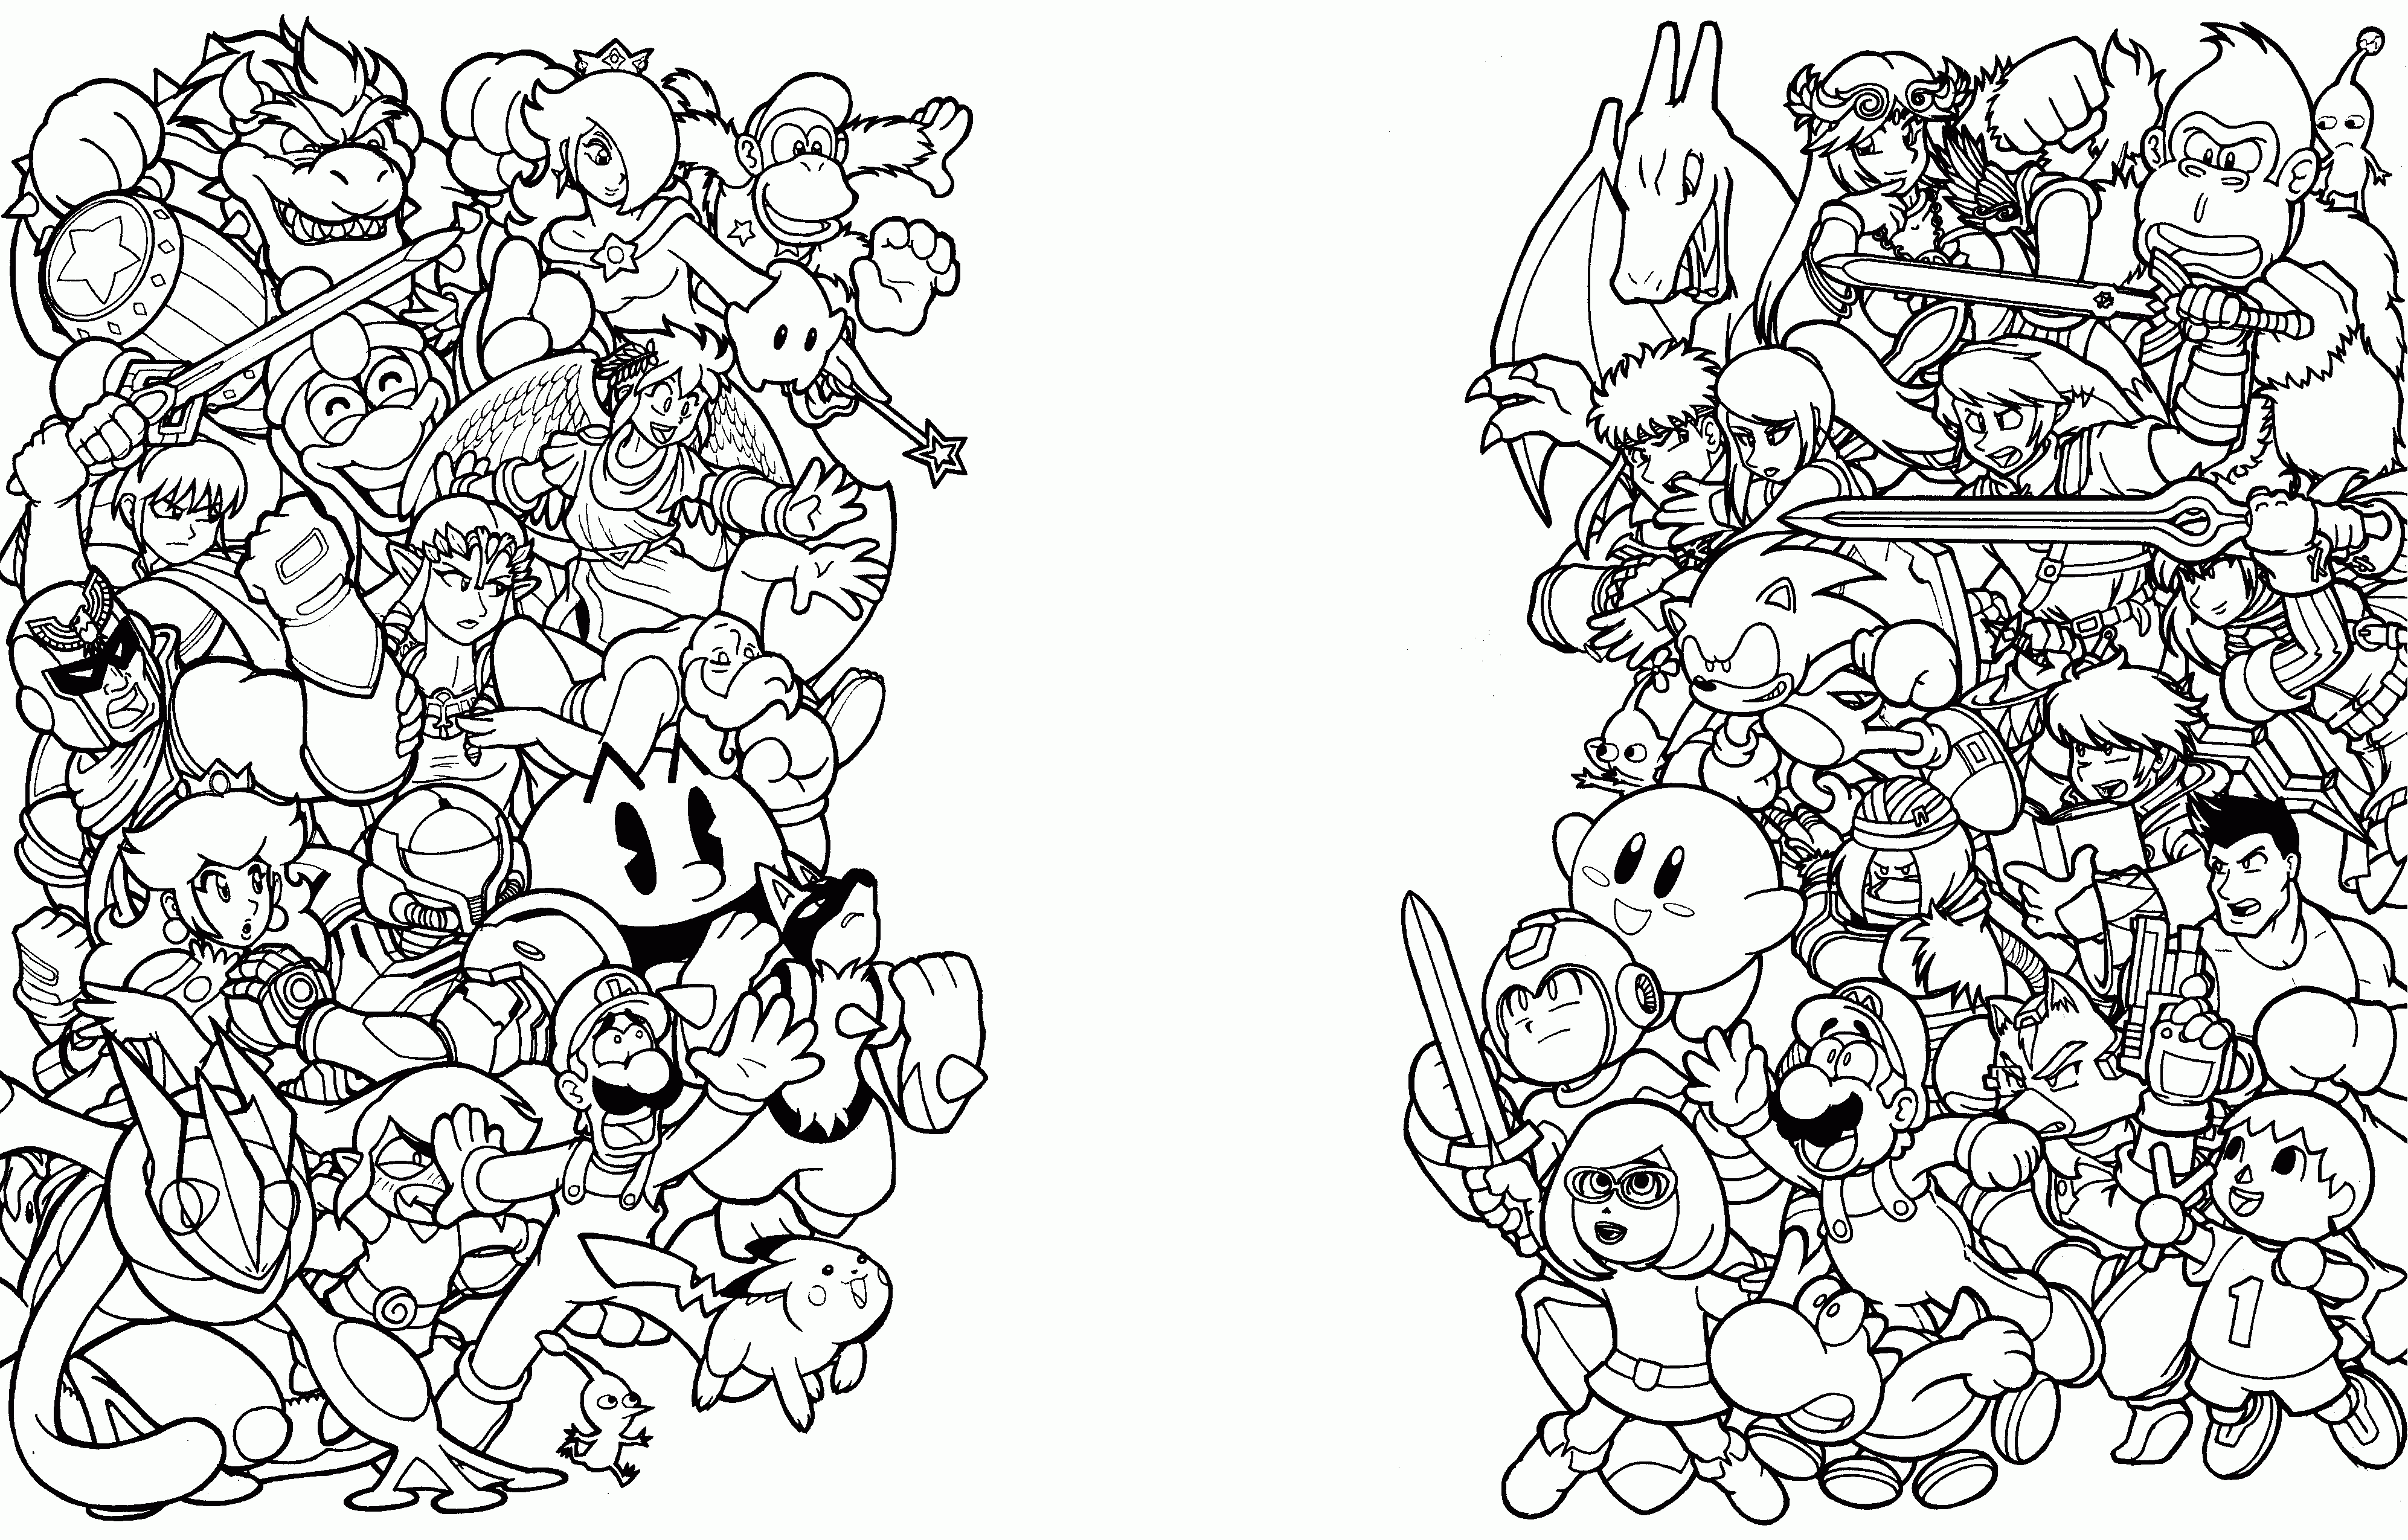 13 Pics of Super Smash Bros Coloring Pages To Print - Kirby Super ...